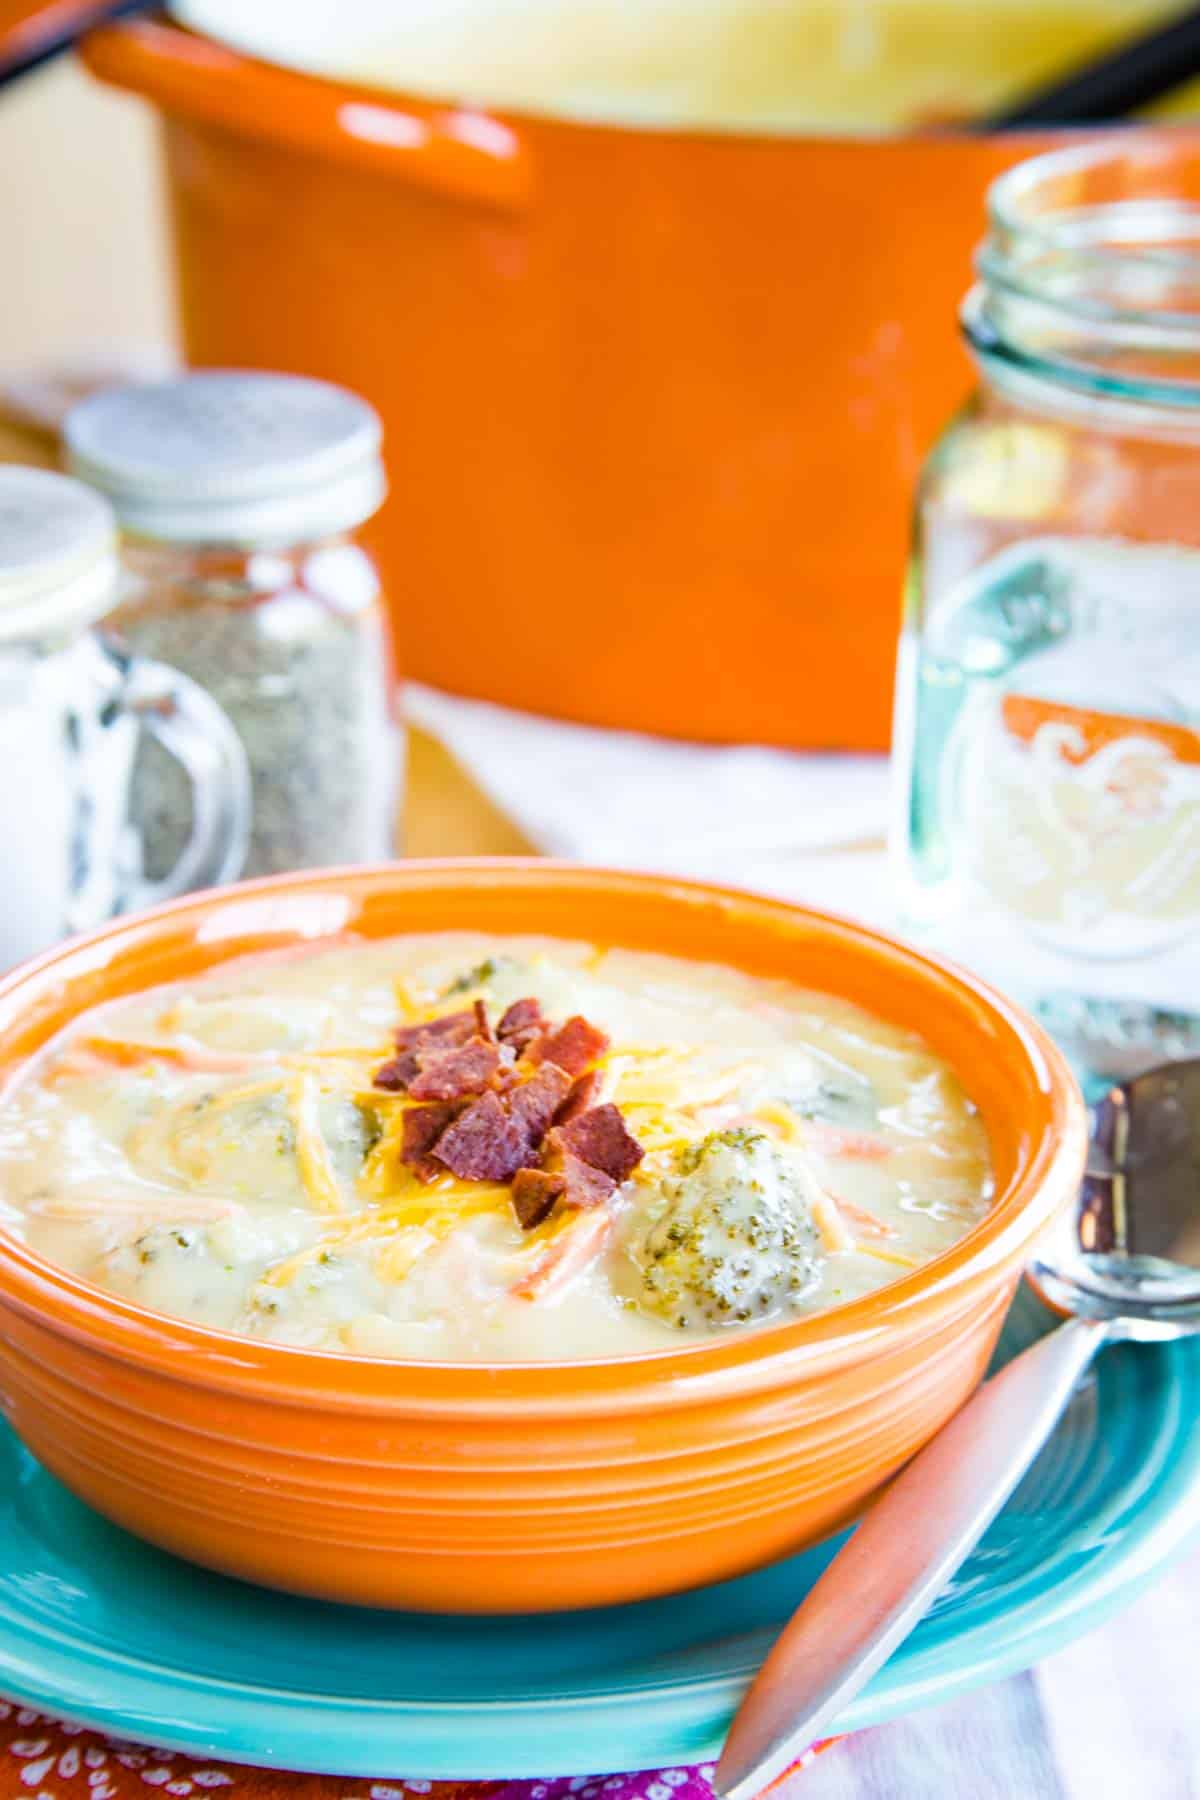 An orange bowl on top of a turquoise plate filled with broccoli cheddar soup with a pot and a salt and pepper shaker in the background.